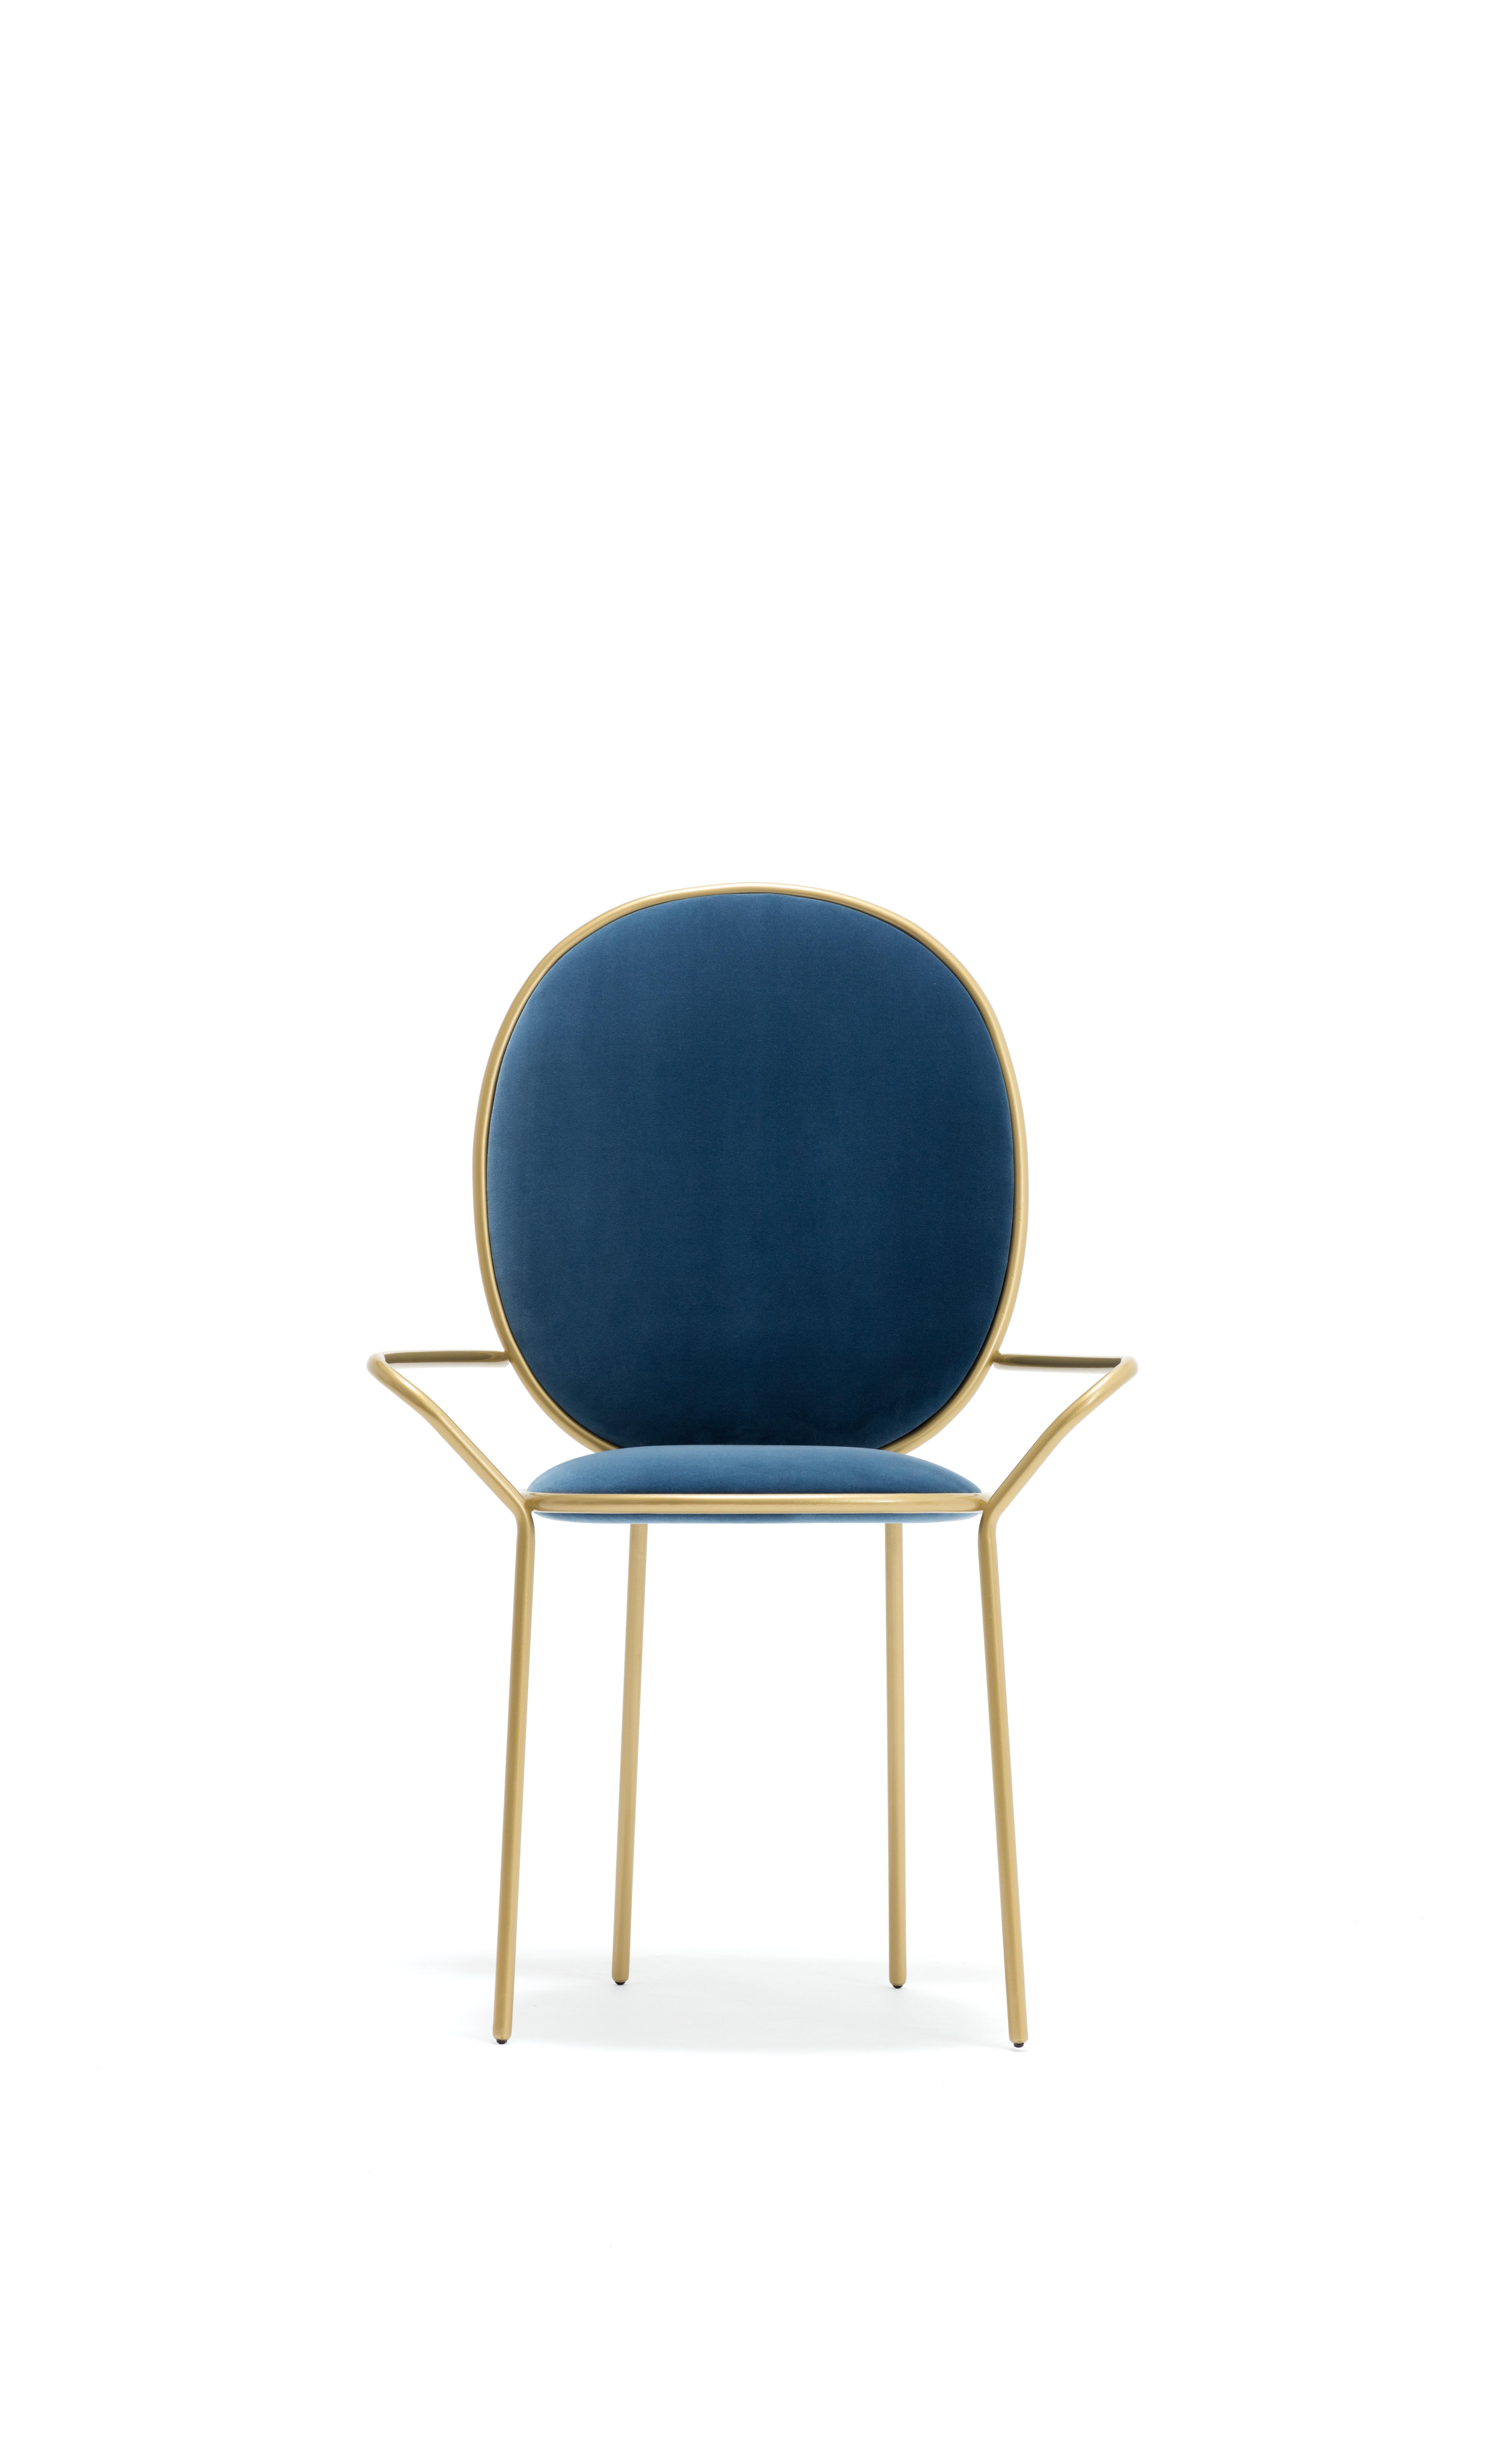 Contemporary Avio blue velvet upholstered dining armchair - Stay by Nika Zupanc

The Stay Family turns everyday seating into a special occasion. The Dining Chair and Dining Armchair are variations on an elegant social theme whilst the Dining Table